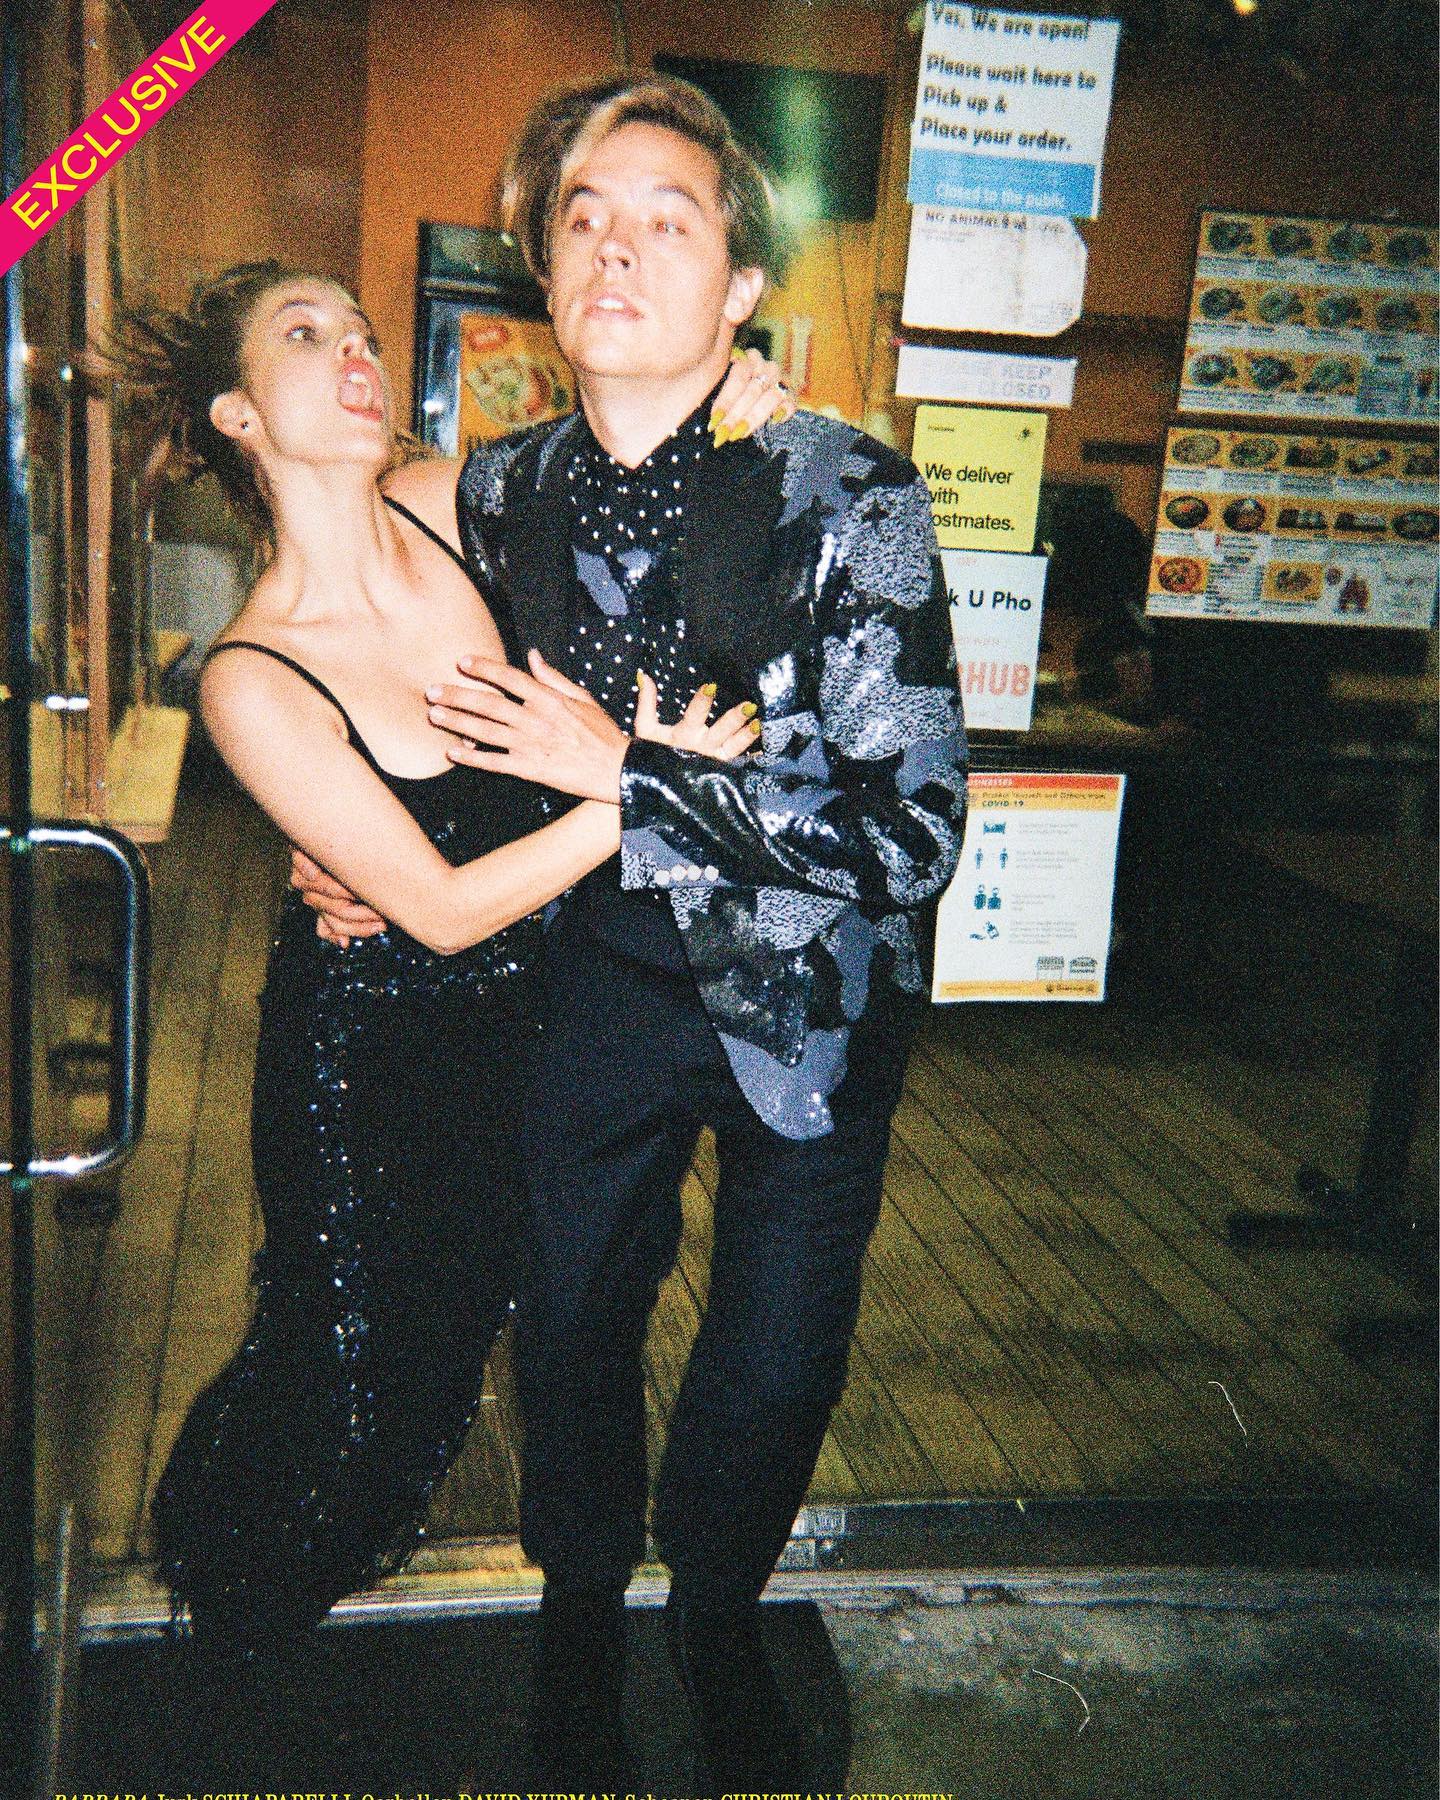 Barbara Palvin et Dylan Sprouse hit the Cover! - Photo 3